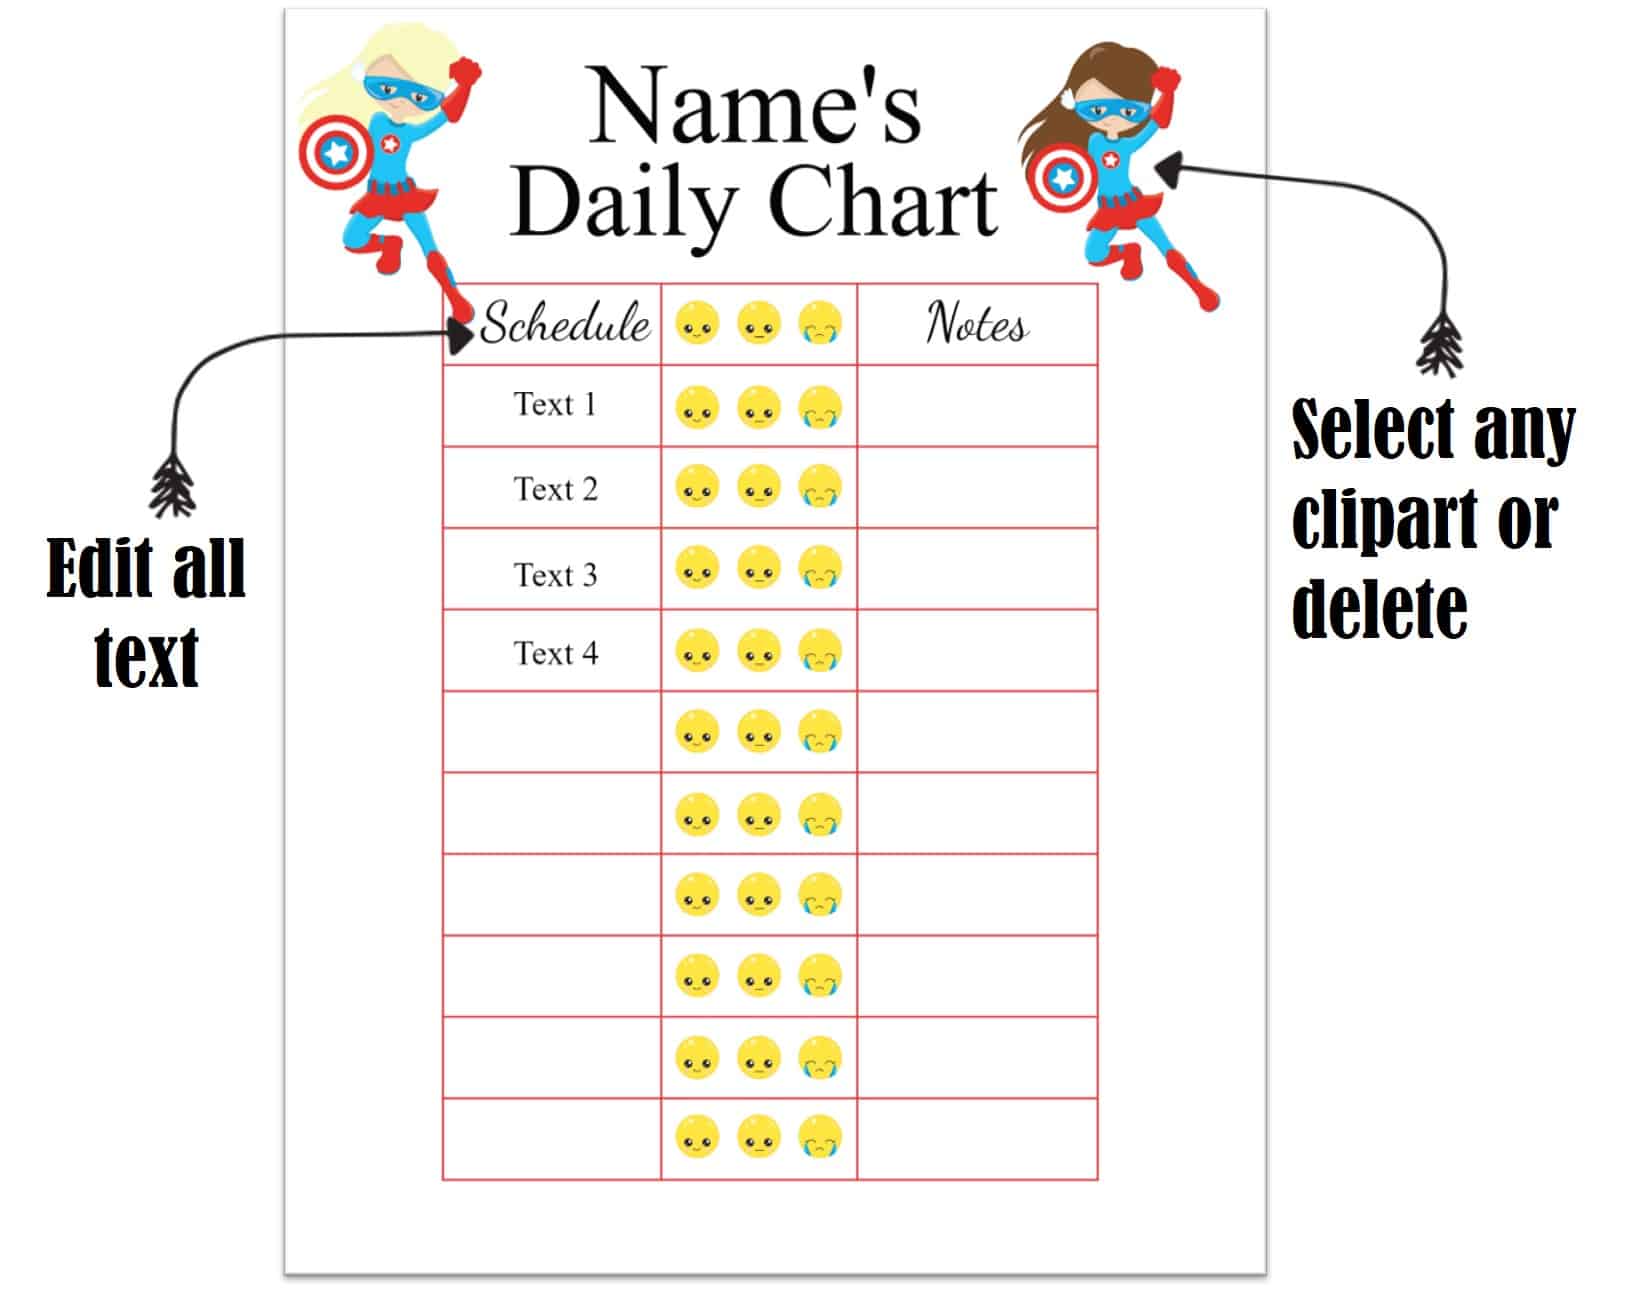 Free Editable Daily Behavior Chart Many Designs Are Available